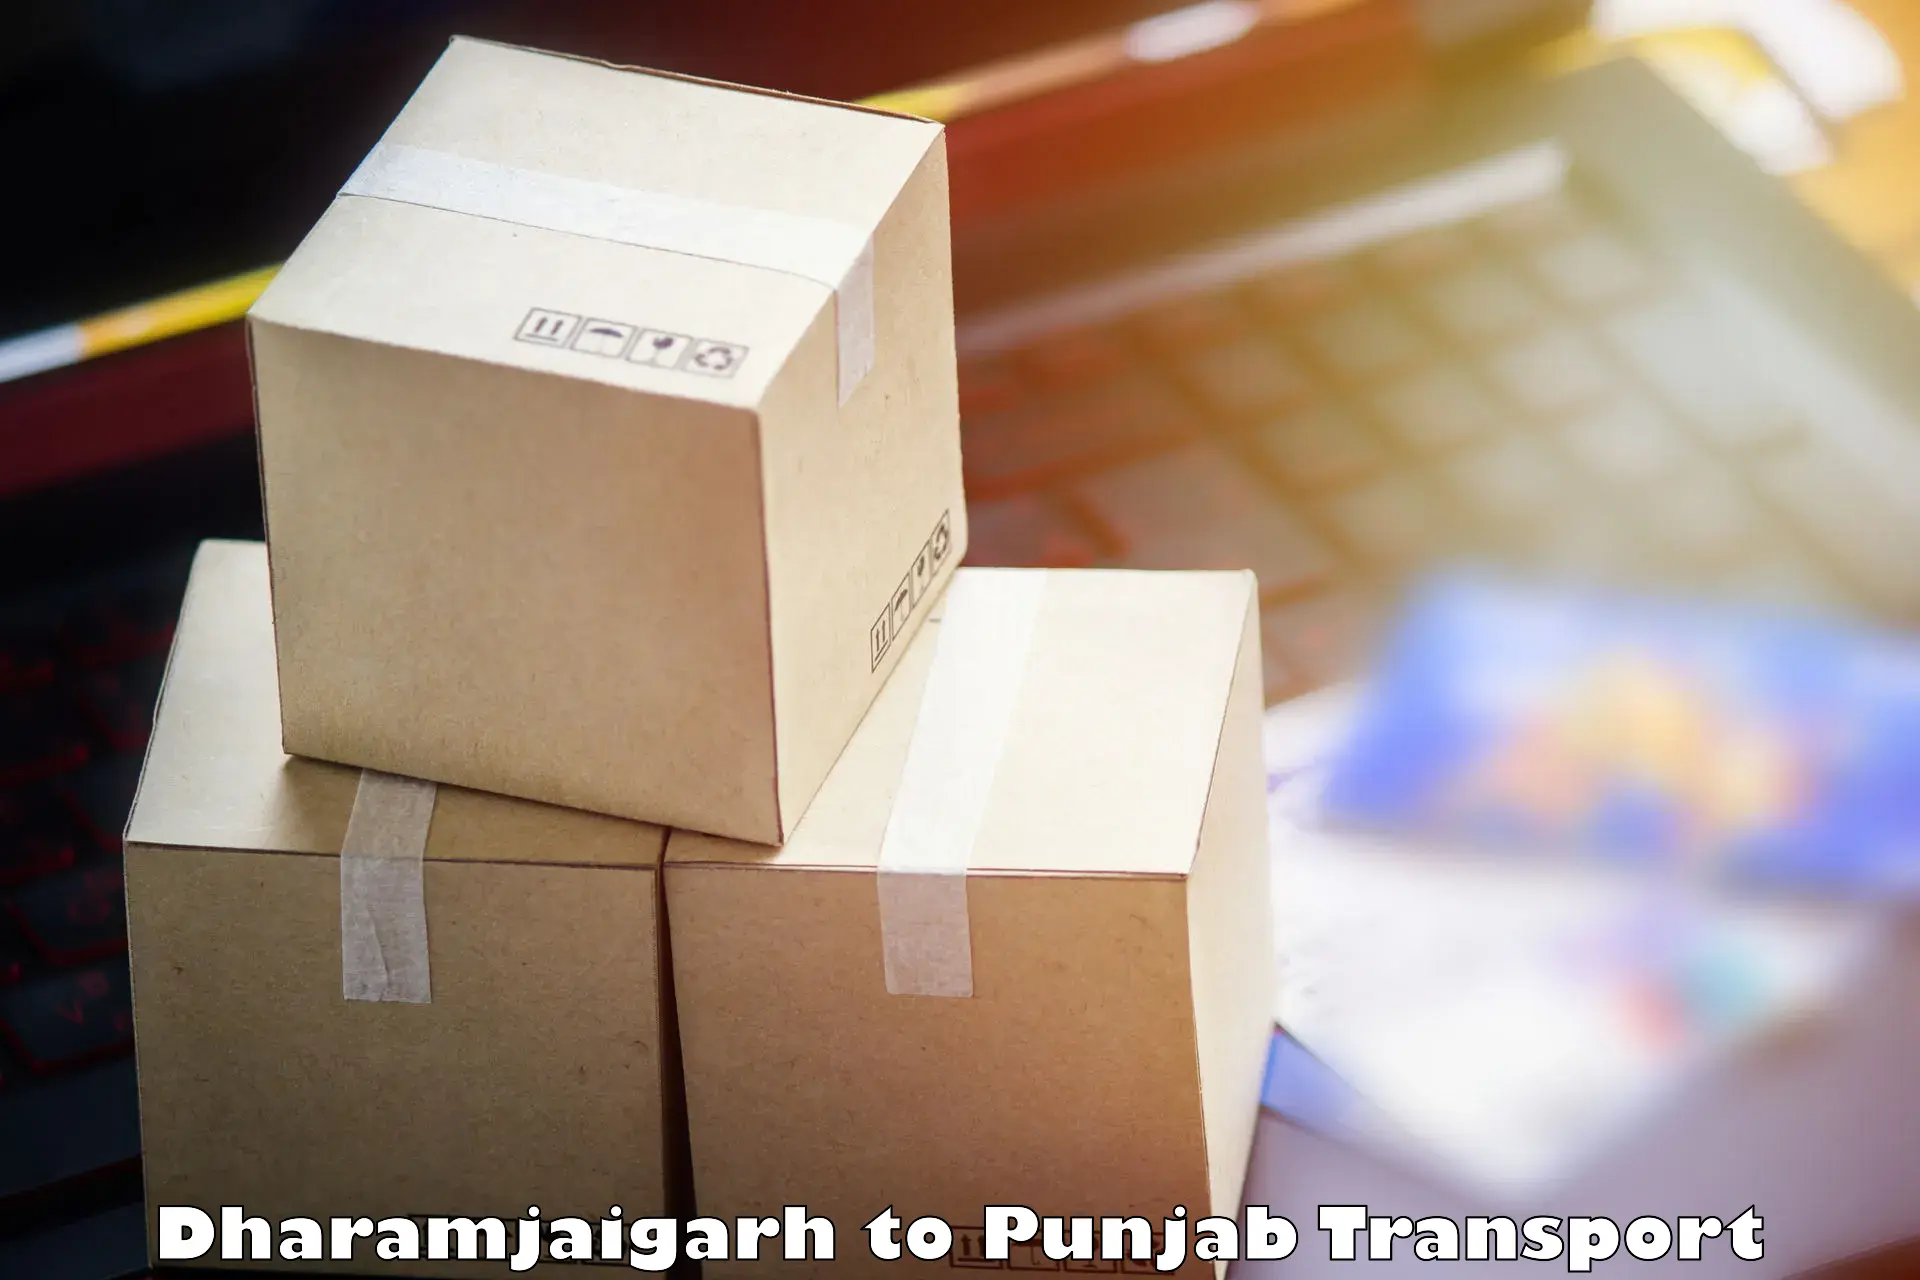 Parcel transport services Dharamjaigarh to Talwara